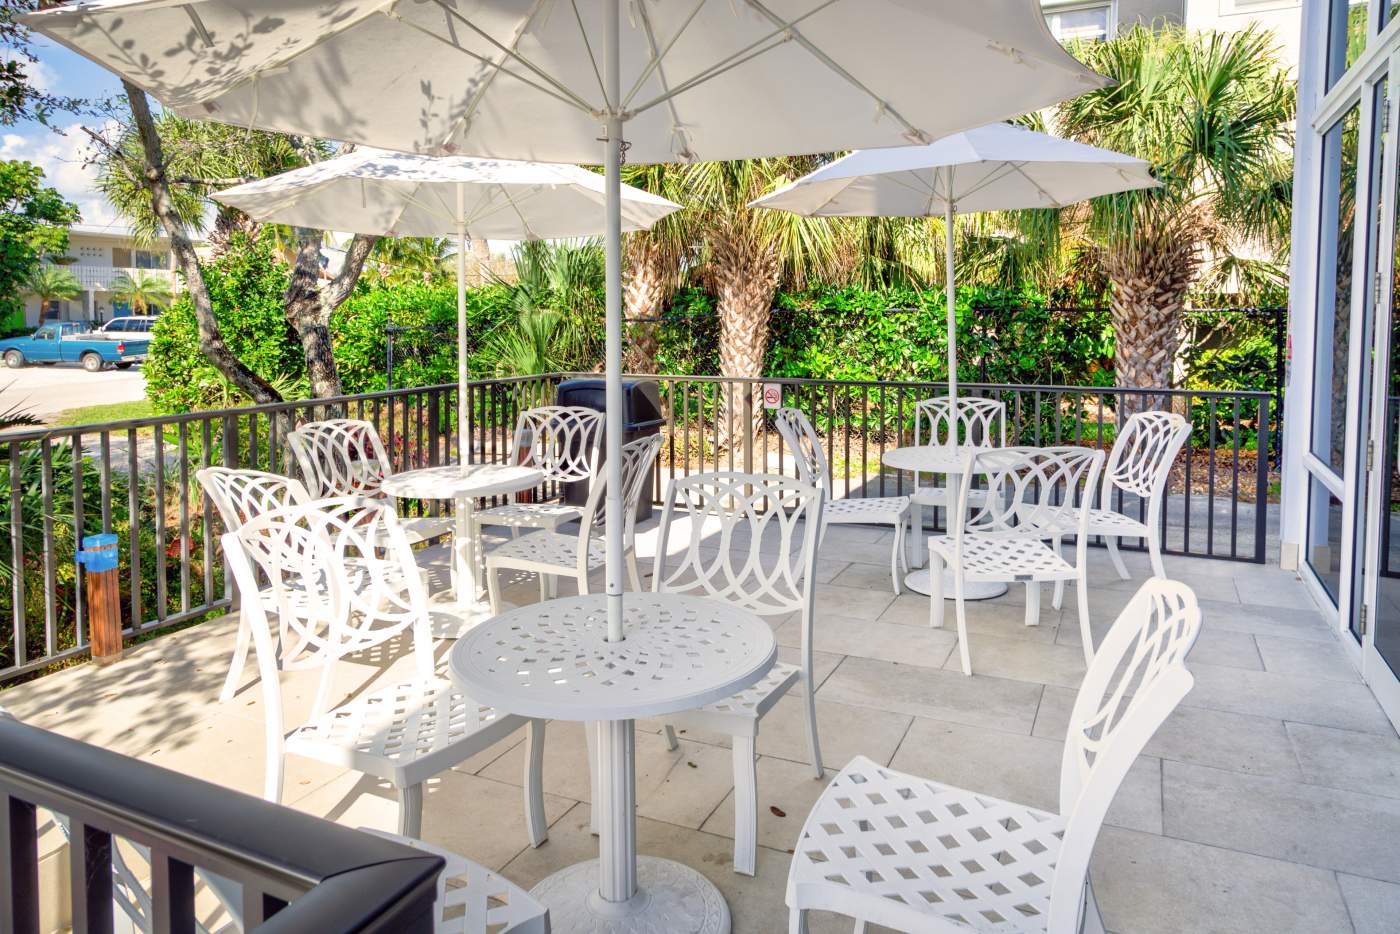 Patio with umbrellas and chairs